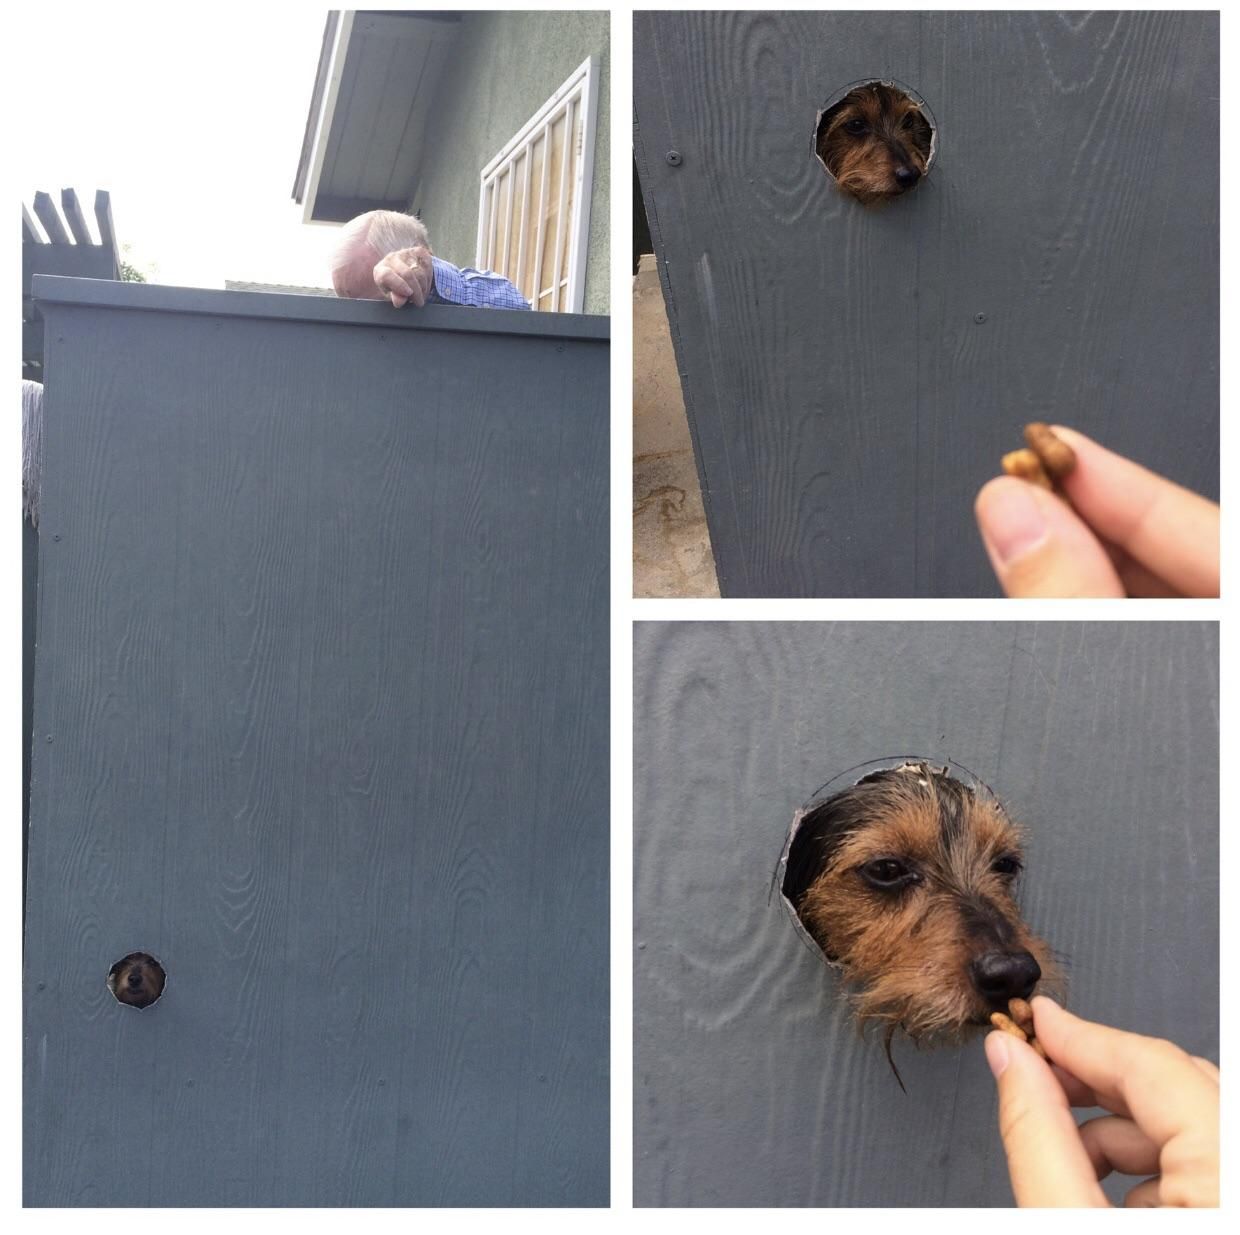 My Grandpa cut a hole in his nice new fence so my dog could see people as they walk by .